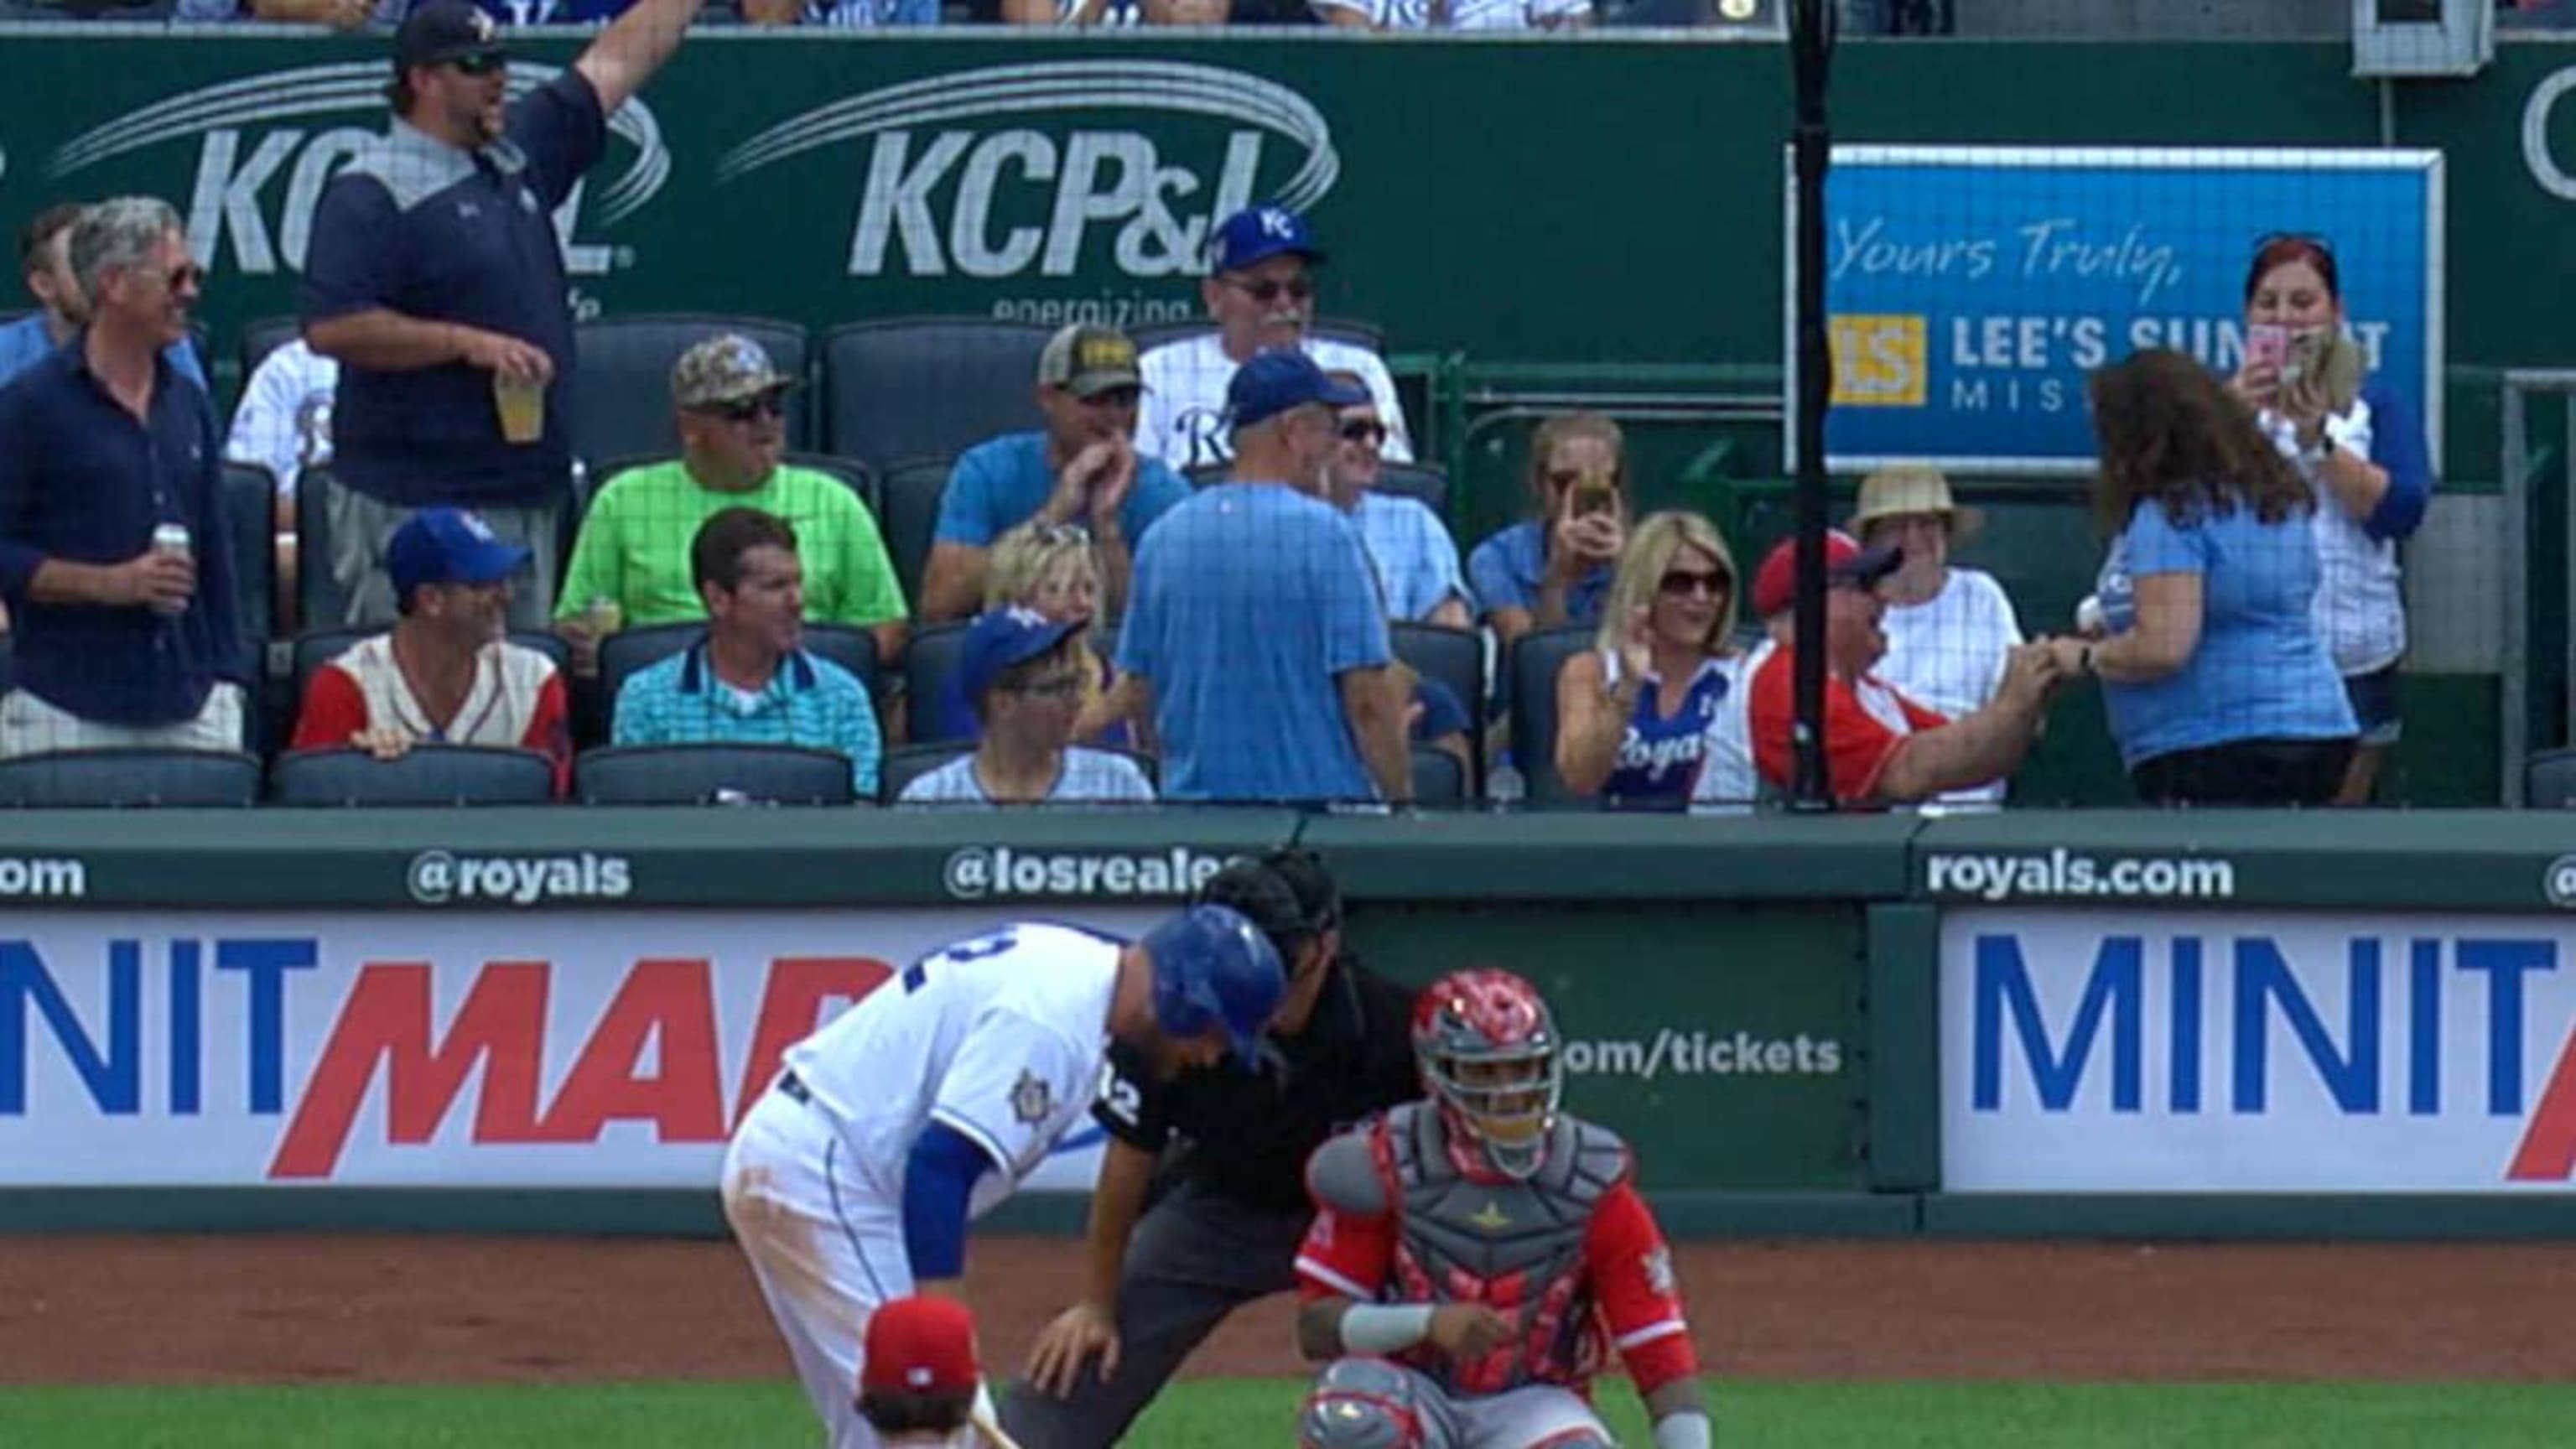 An Angels fan in a Mike Trout jersey proposed to his Royals fan